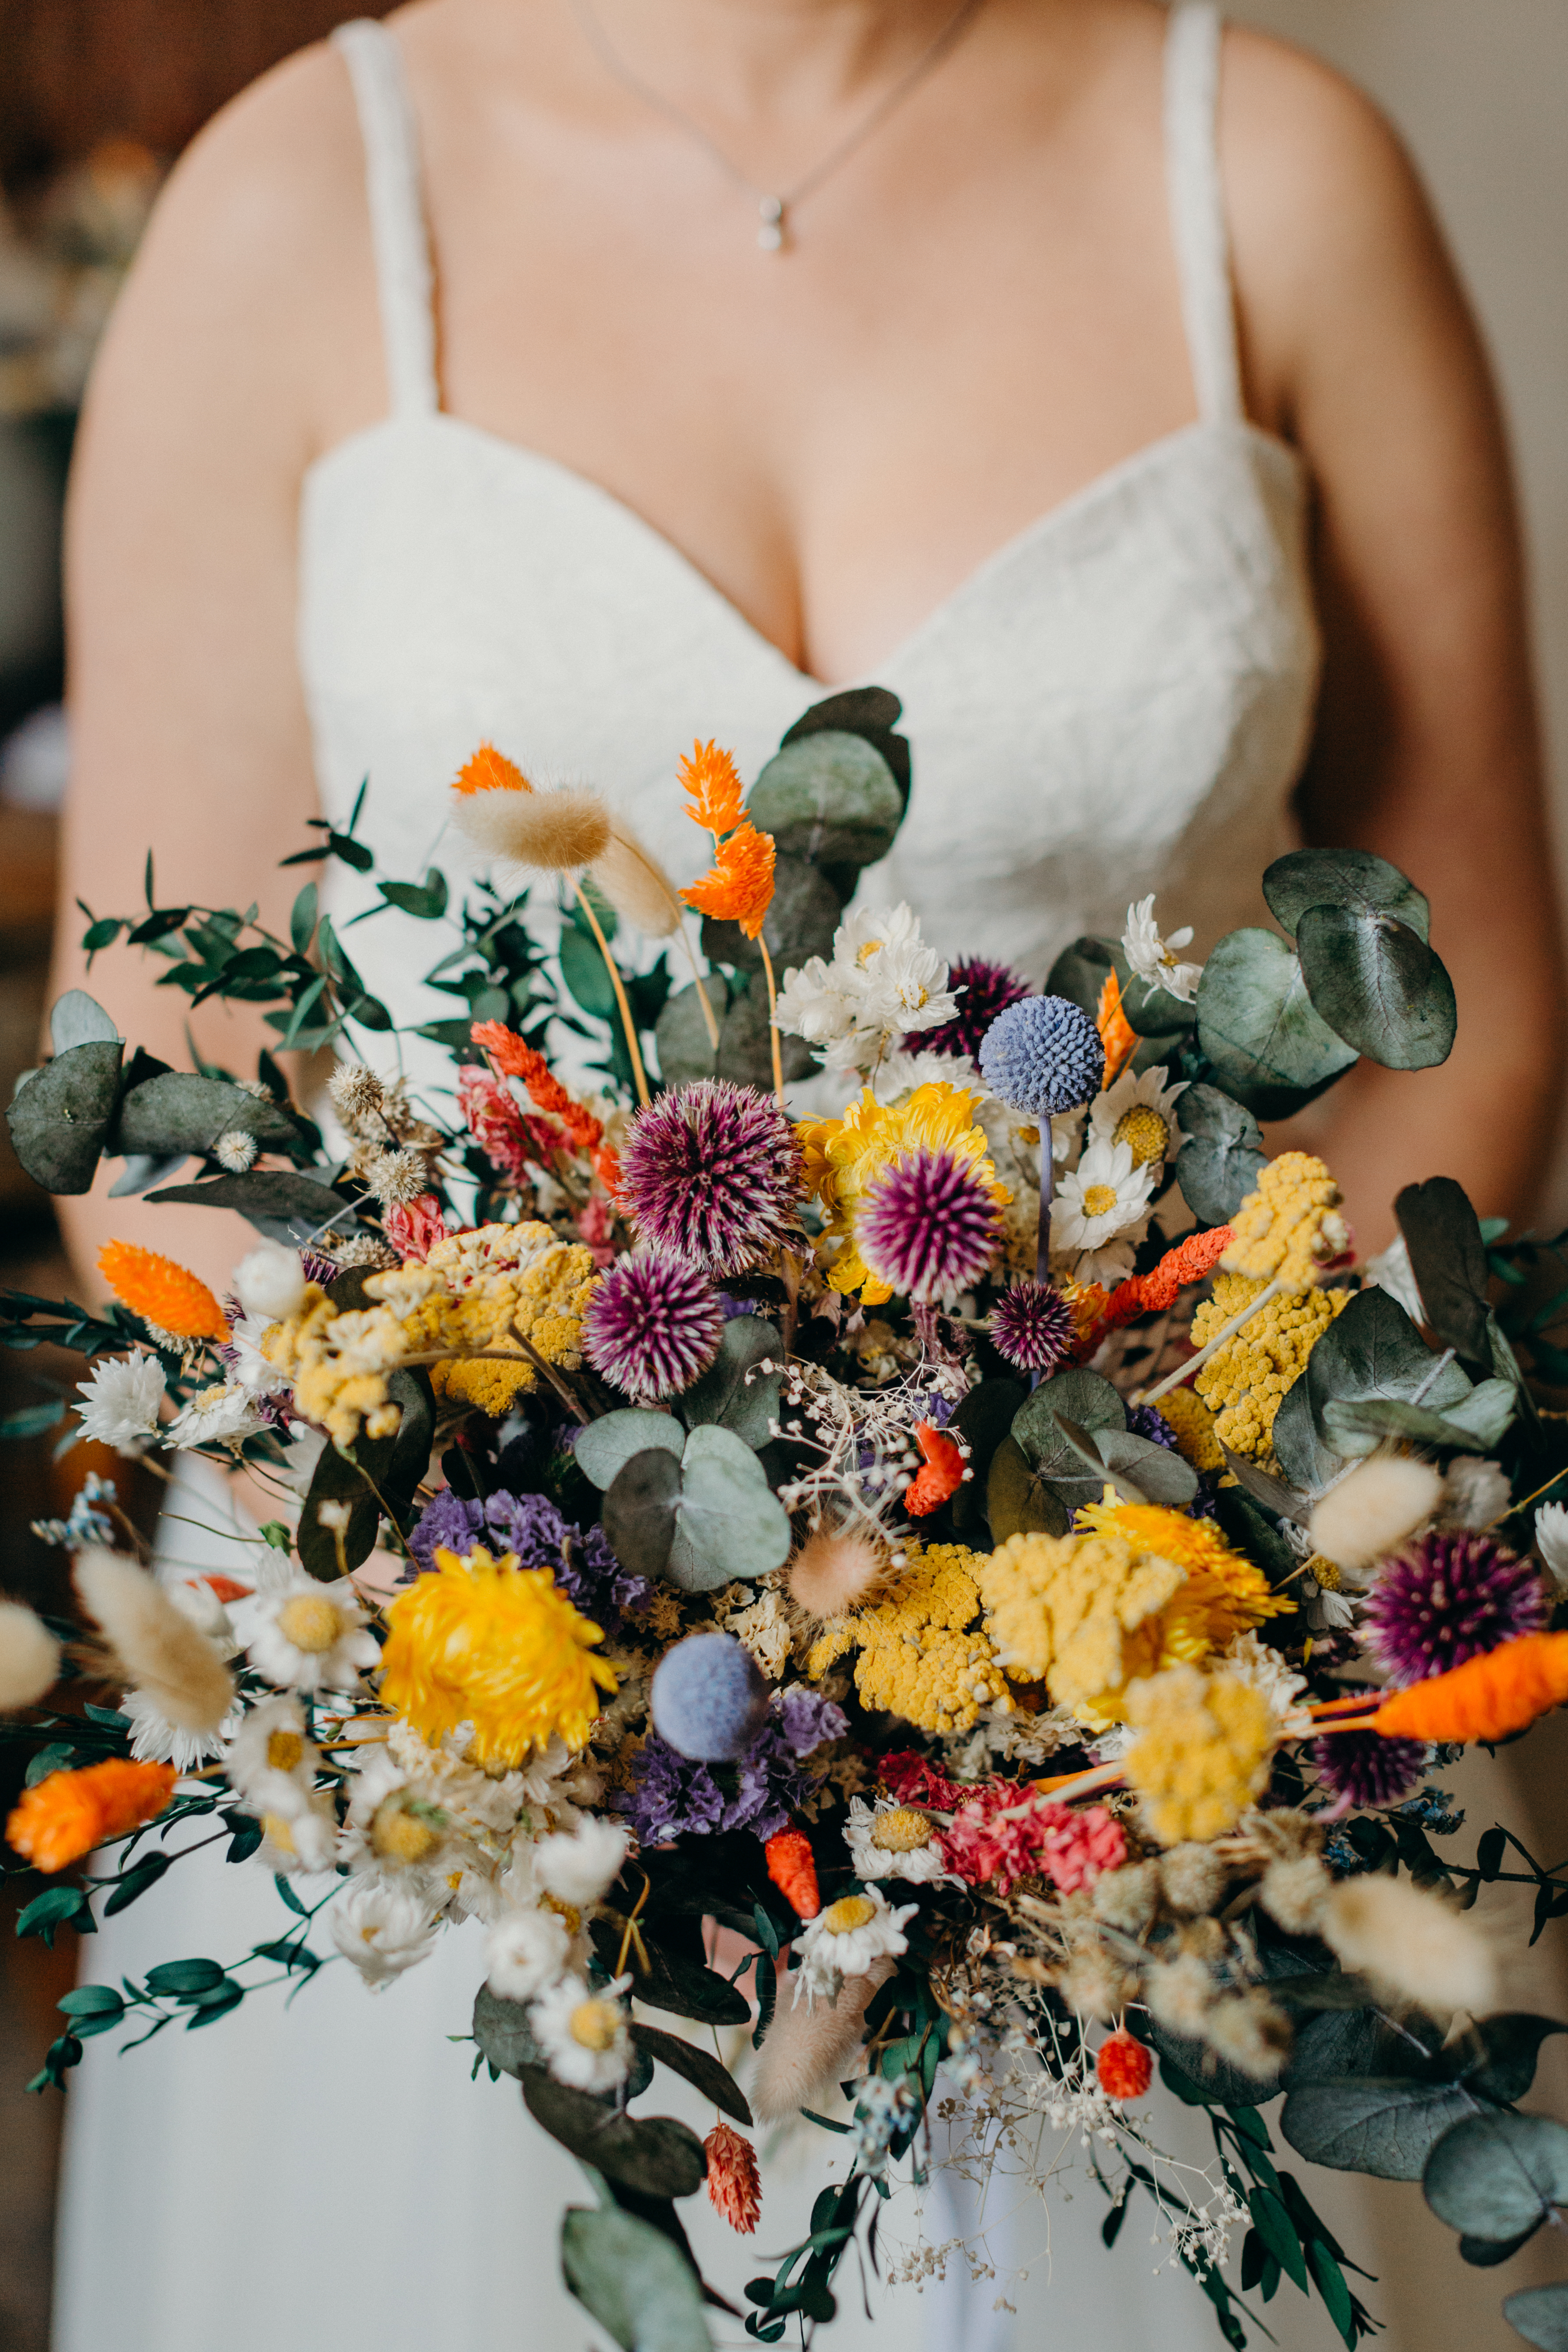 The Most Popular Flowers For A Traditional Wedding